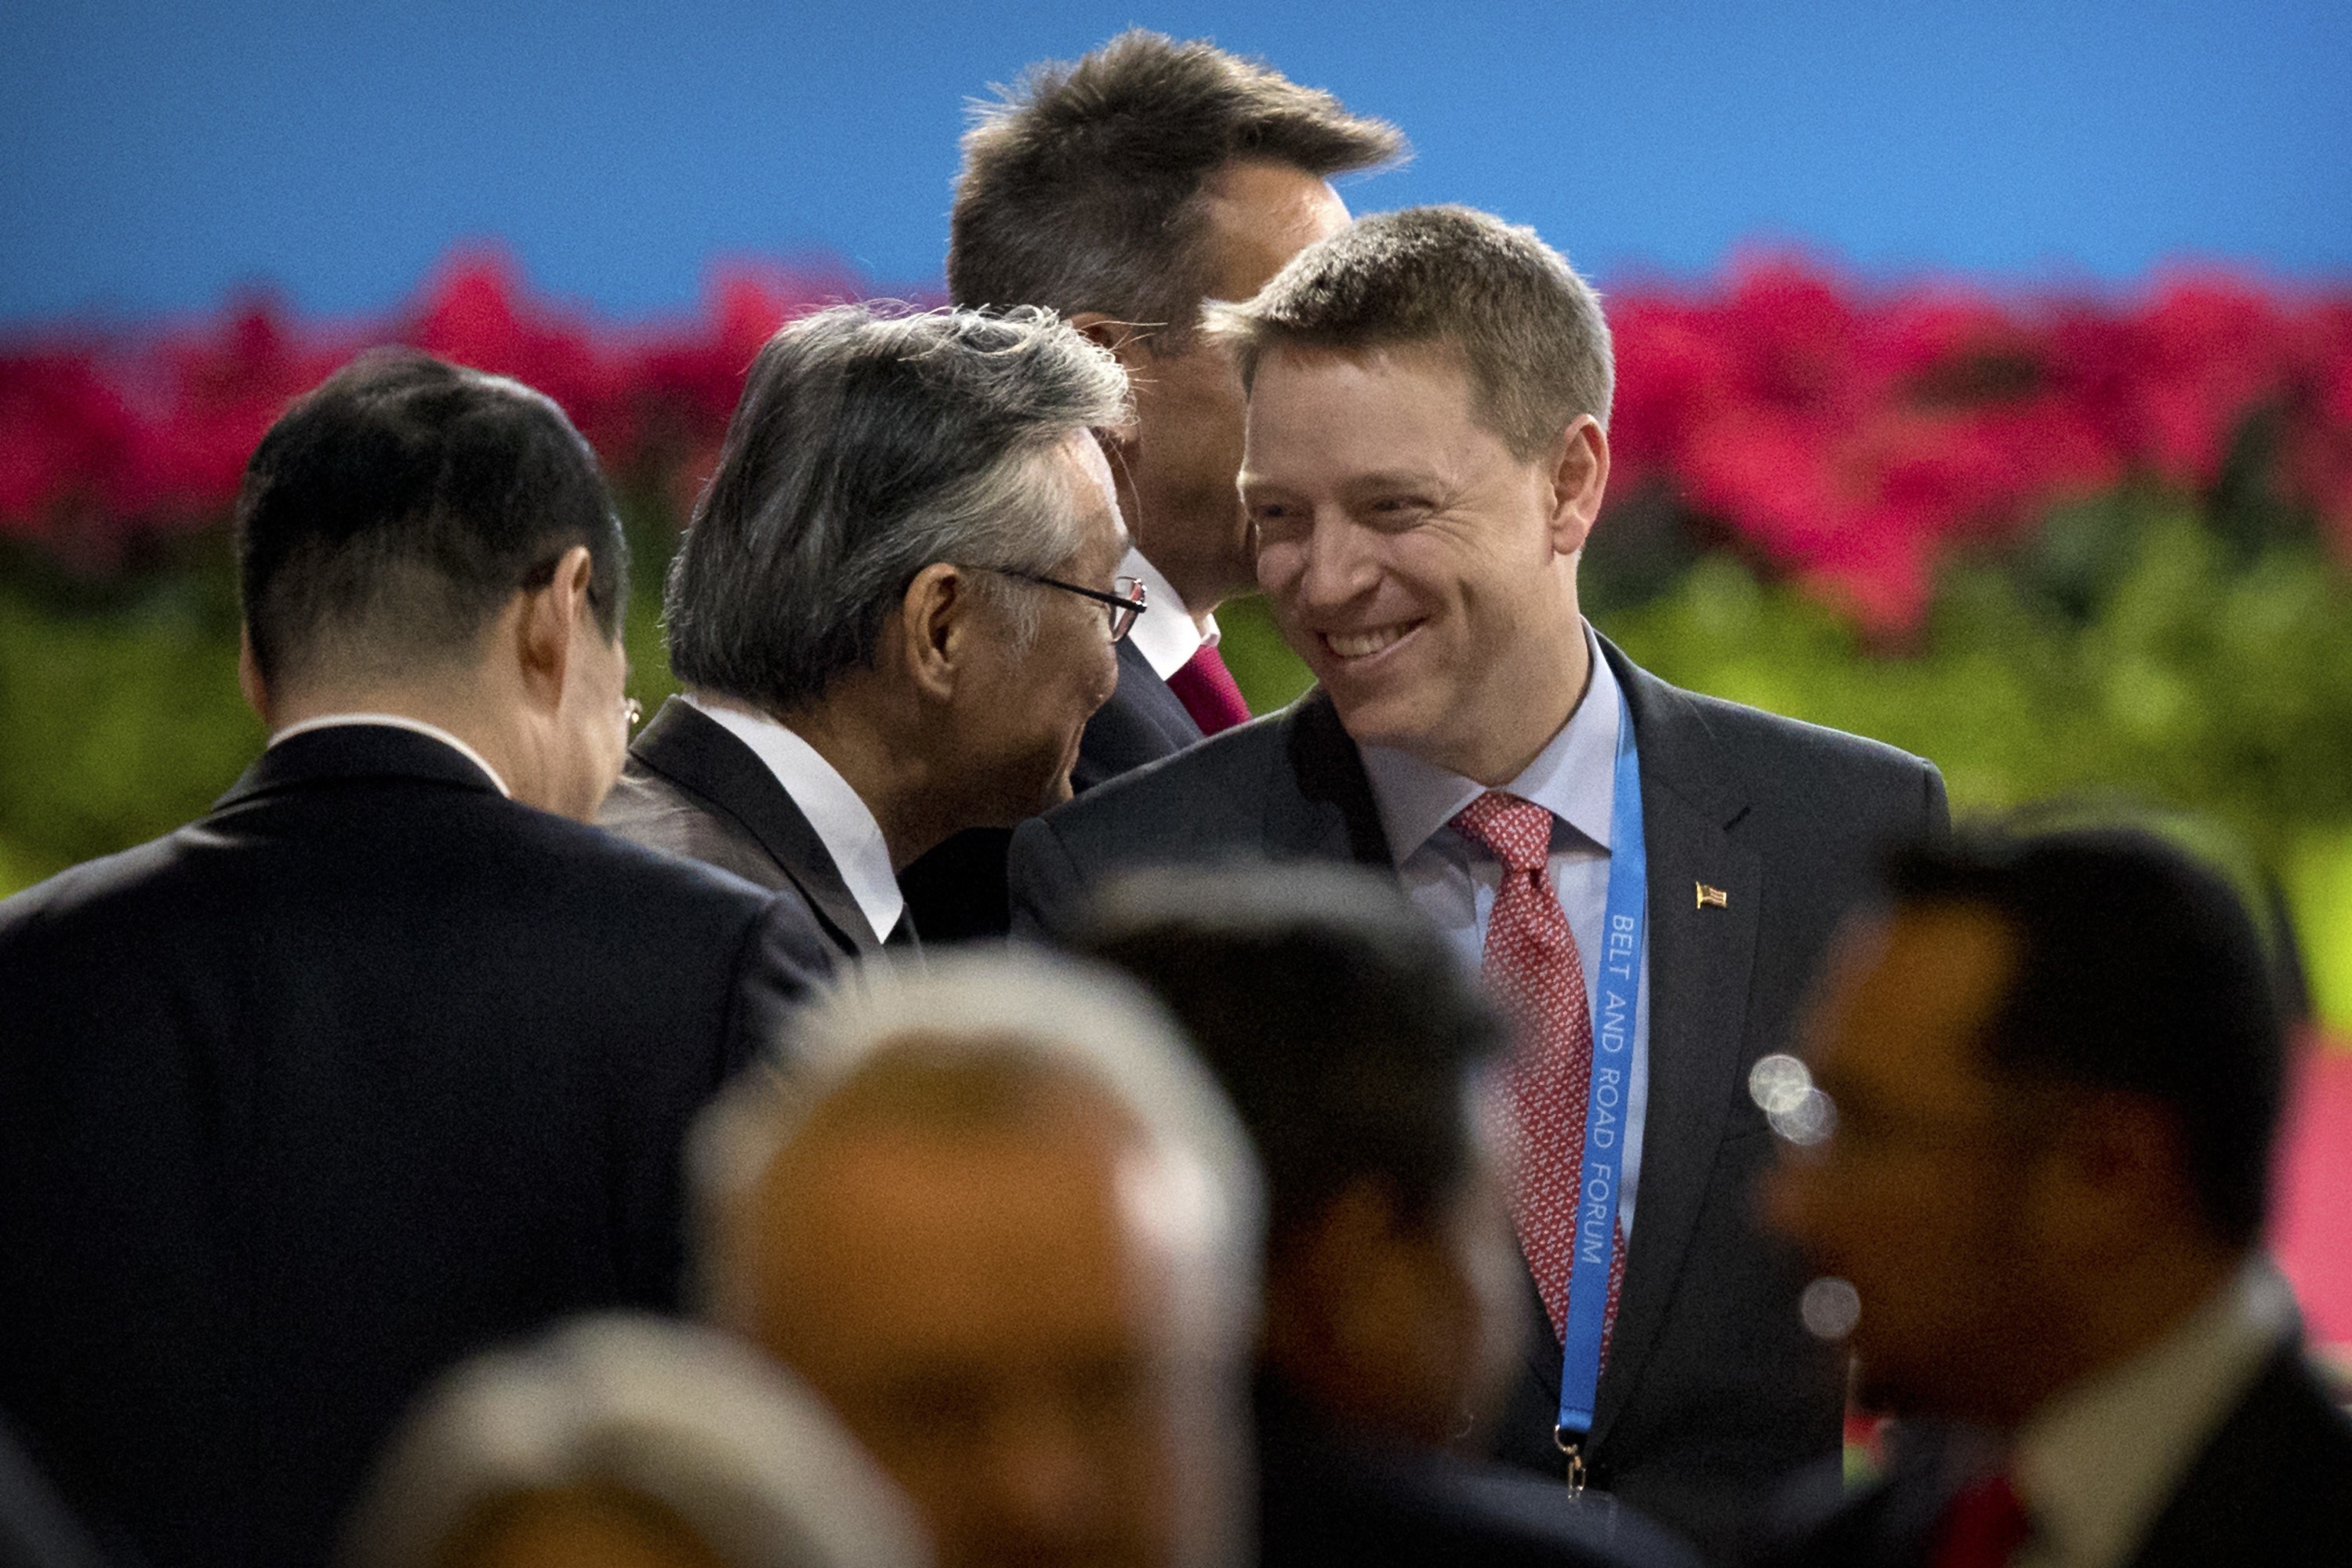 Matt Pottinger, US National Security Council senior director for East Asia, arrives for the opening ceremony of the belt and road forum in Beijing on Sunday. Photo: AP